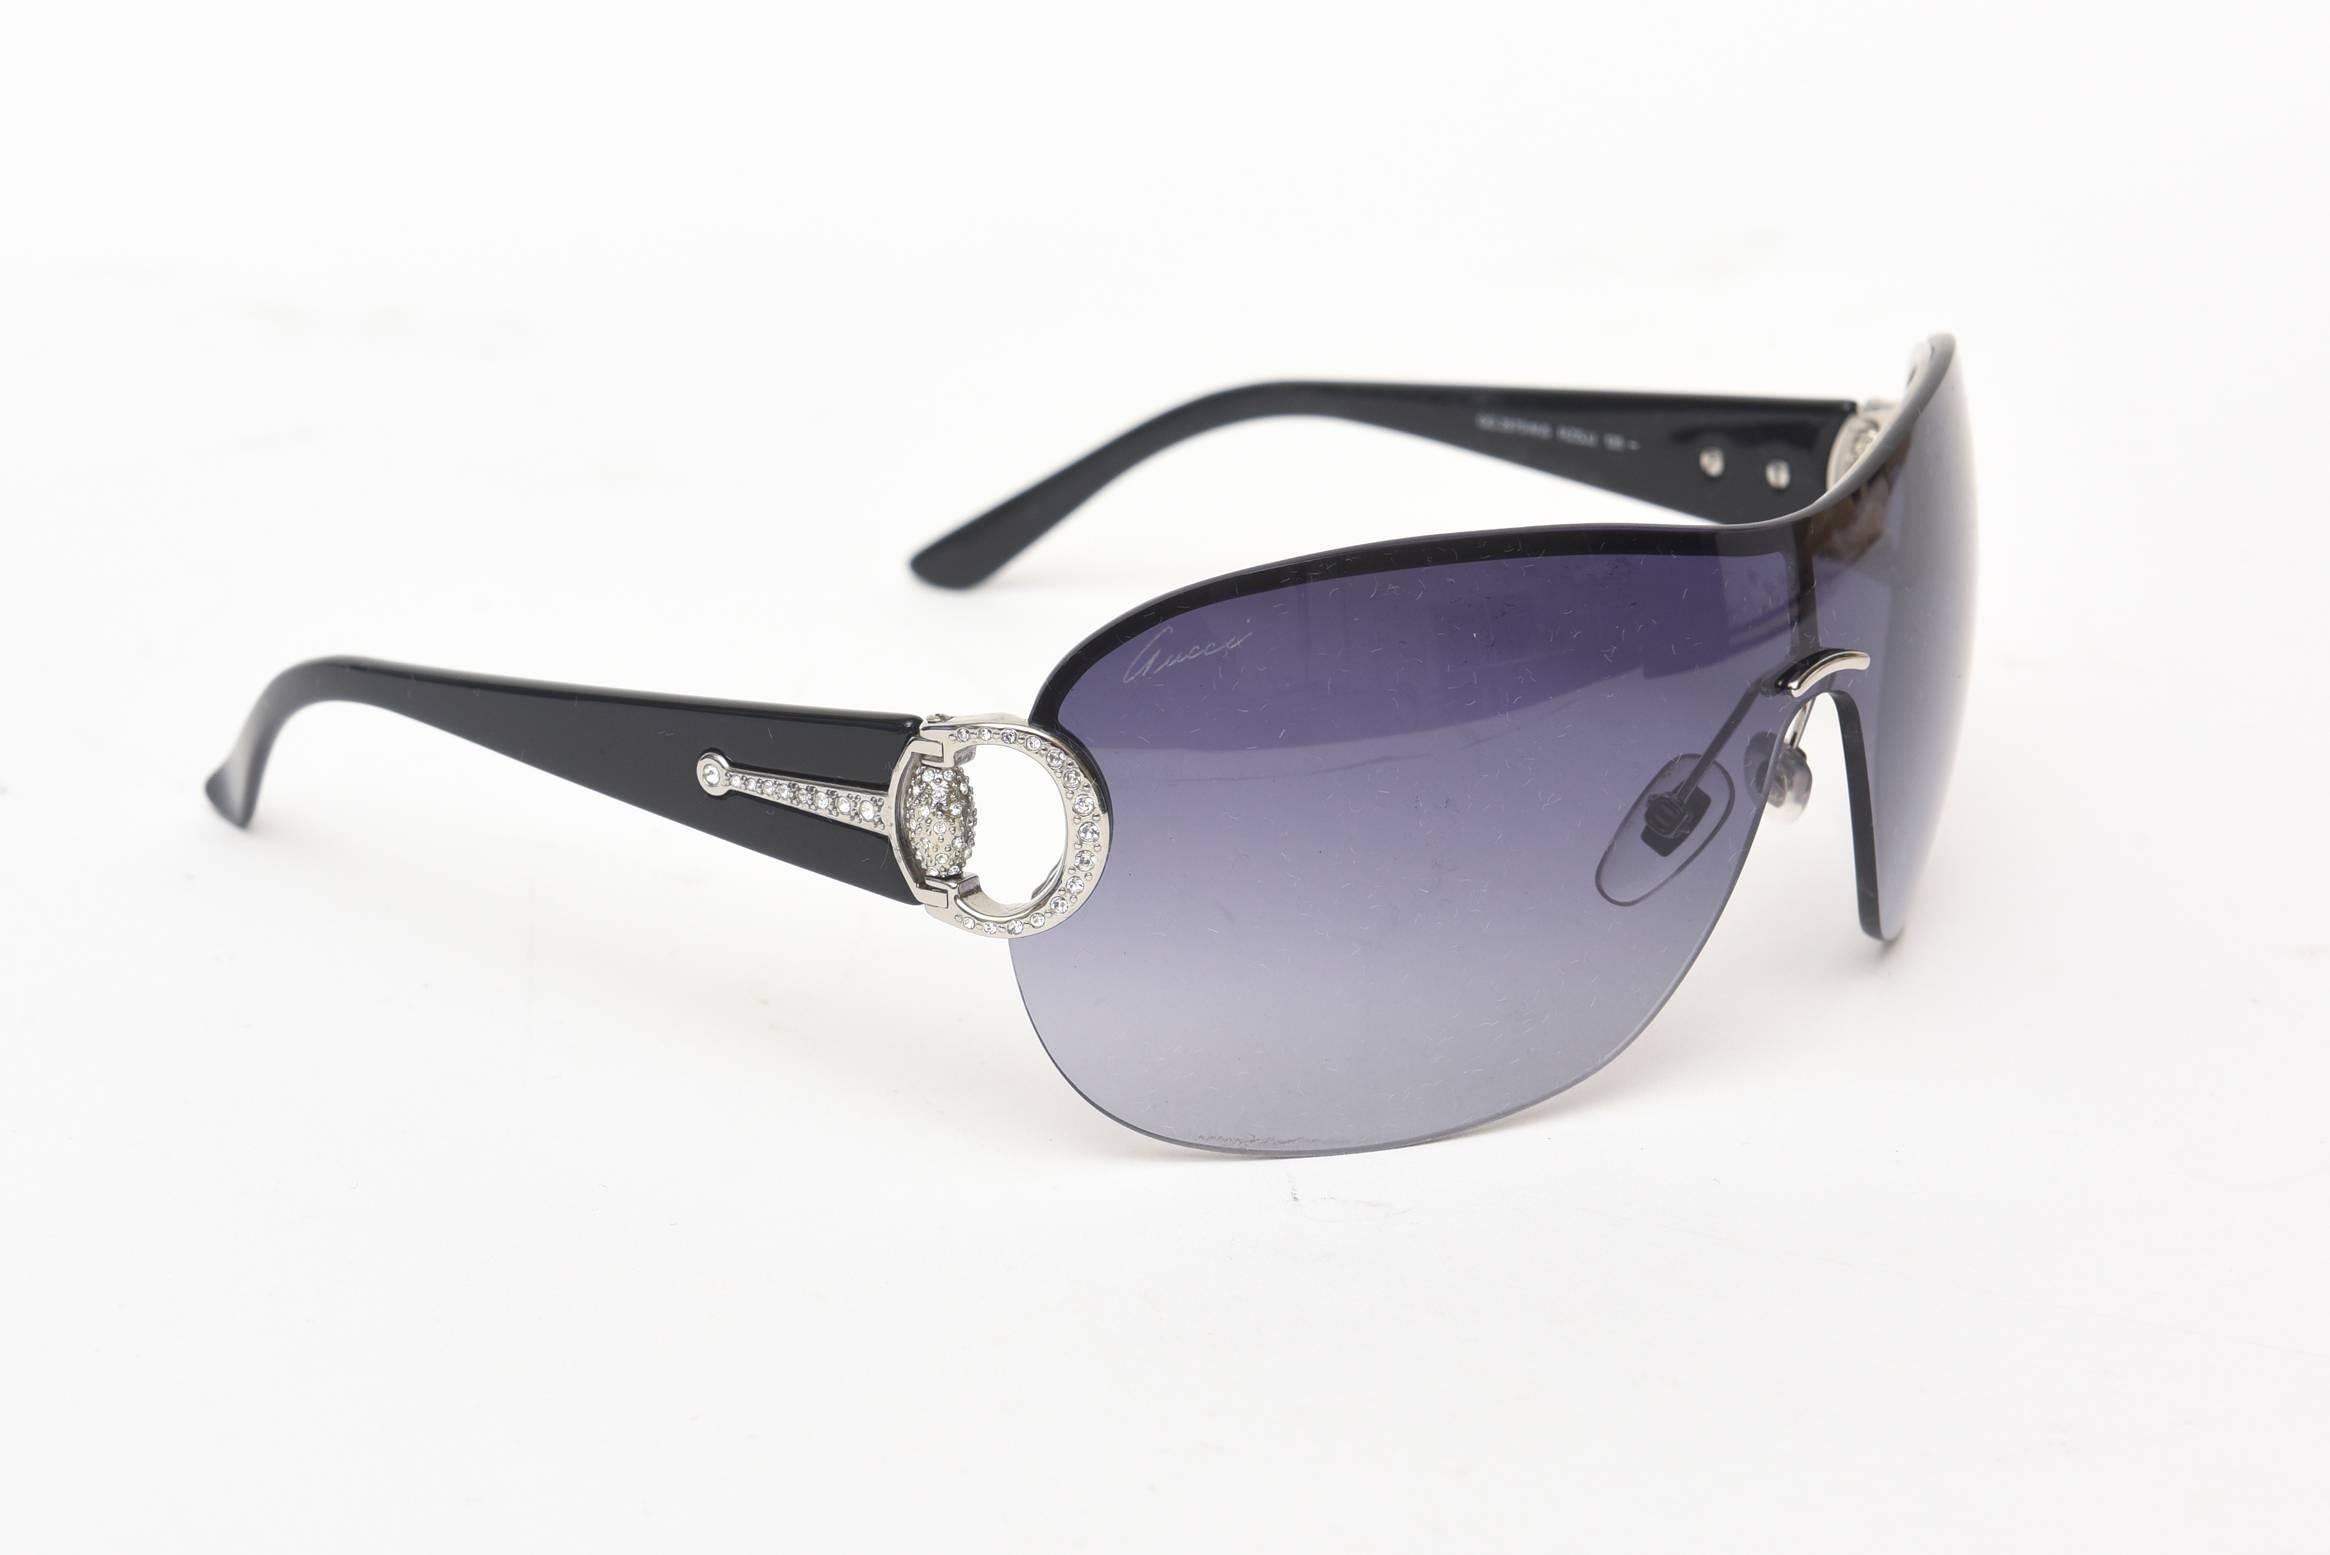 This Gucci sunglasses has never been worn and has the original papers , case and box.
They are dramatic with rhinestones on the side.
They are in aviator form with a blue tinted lens.